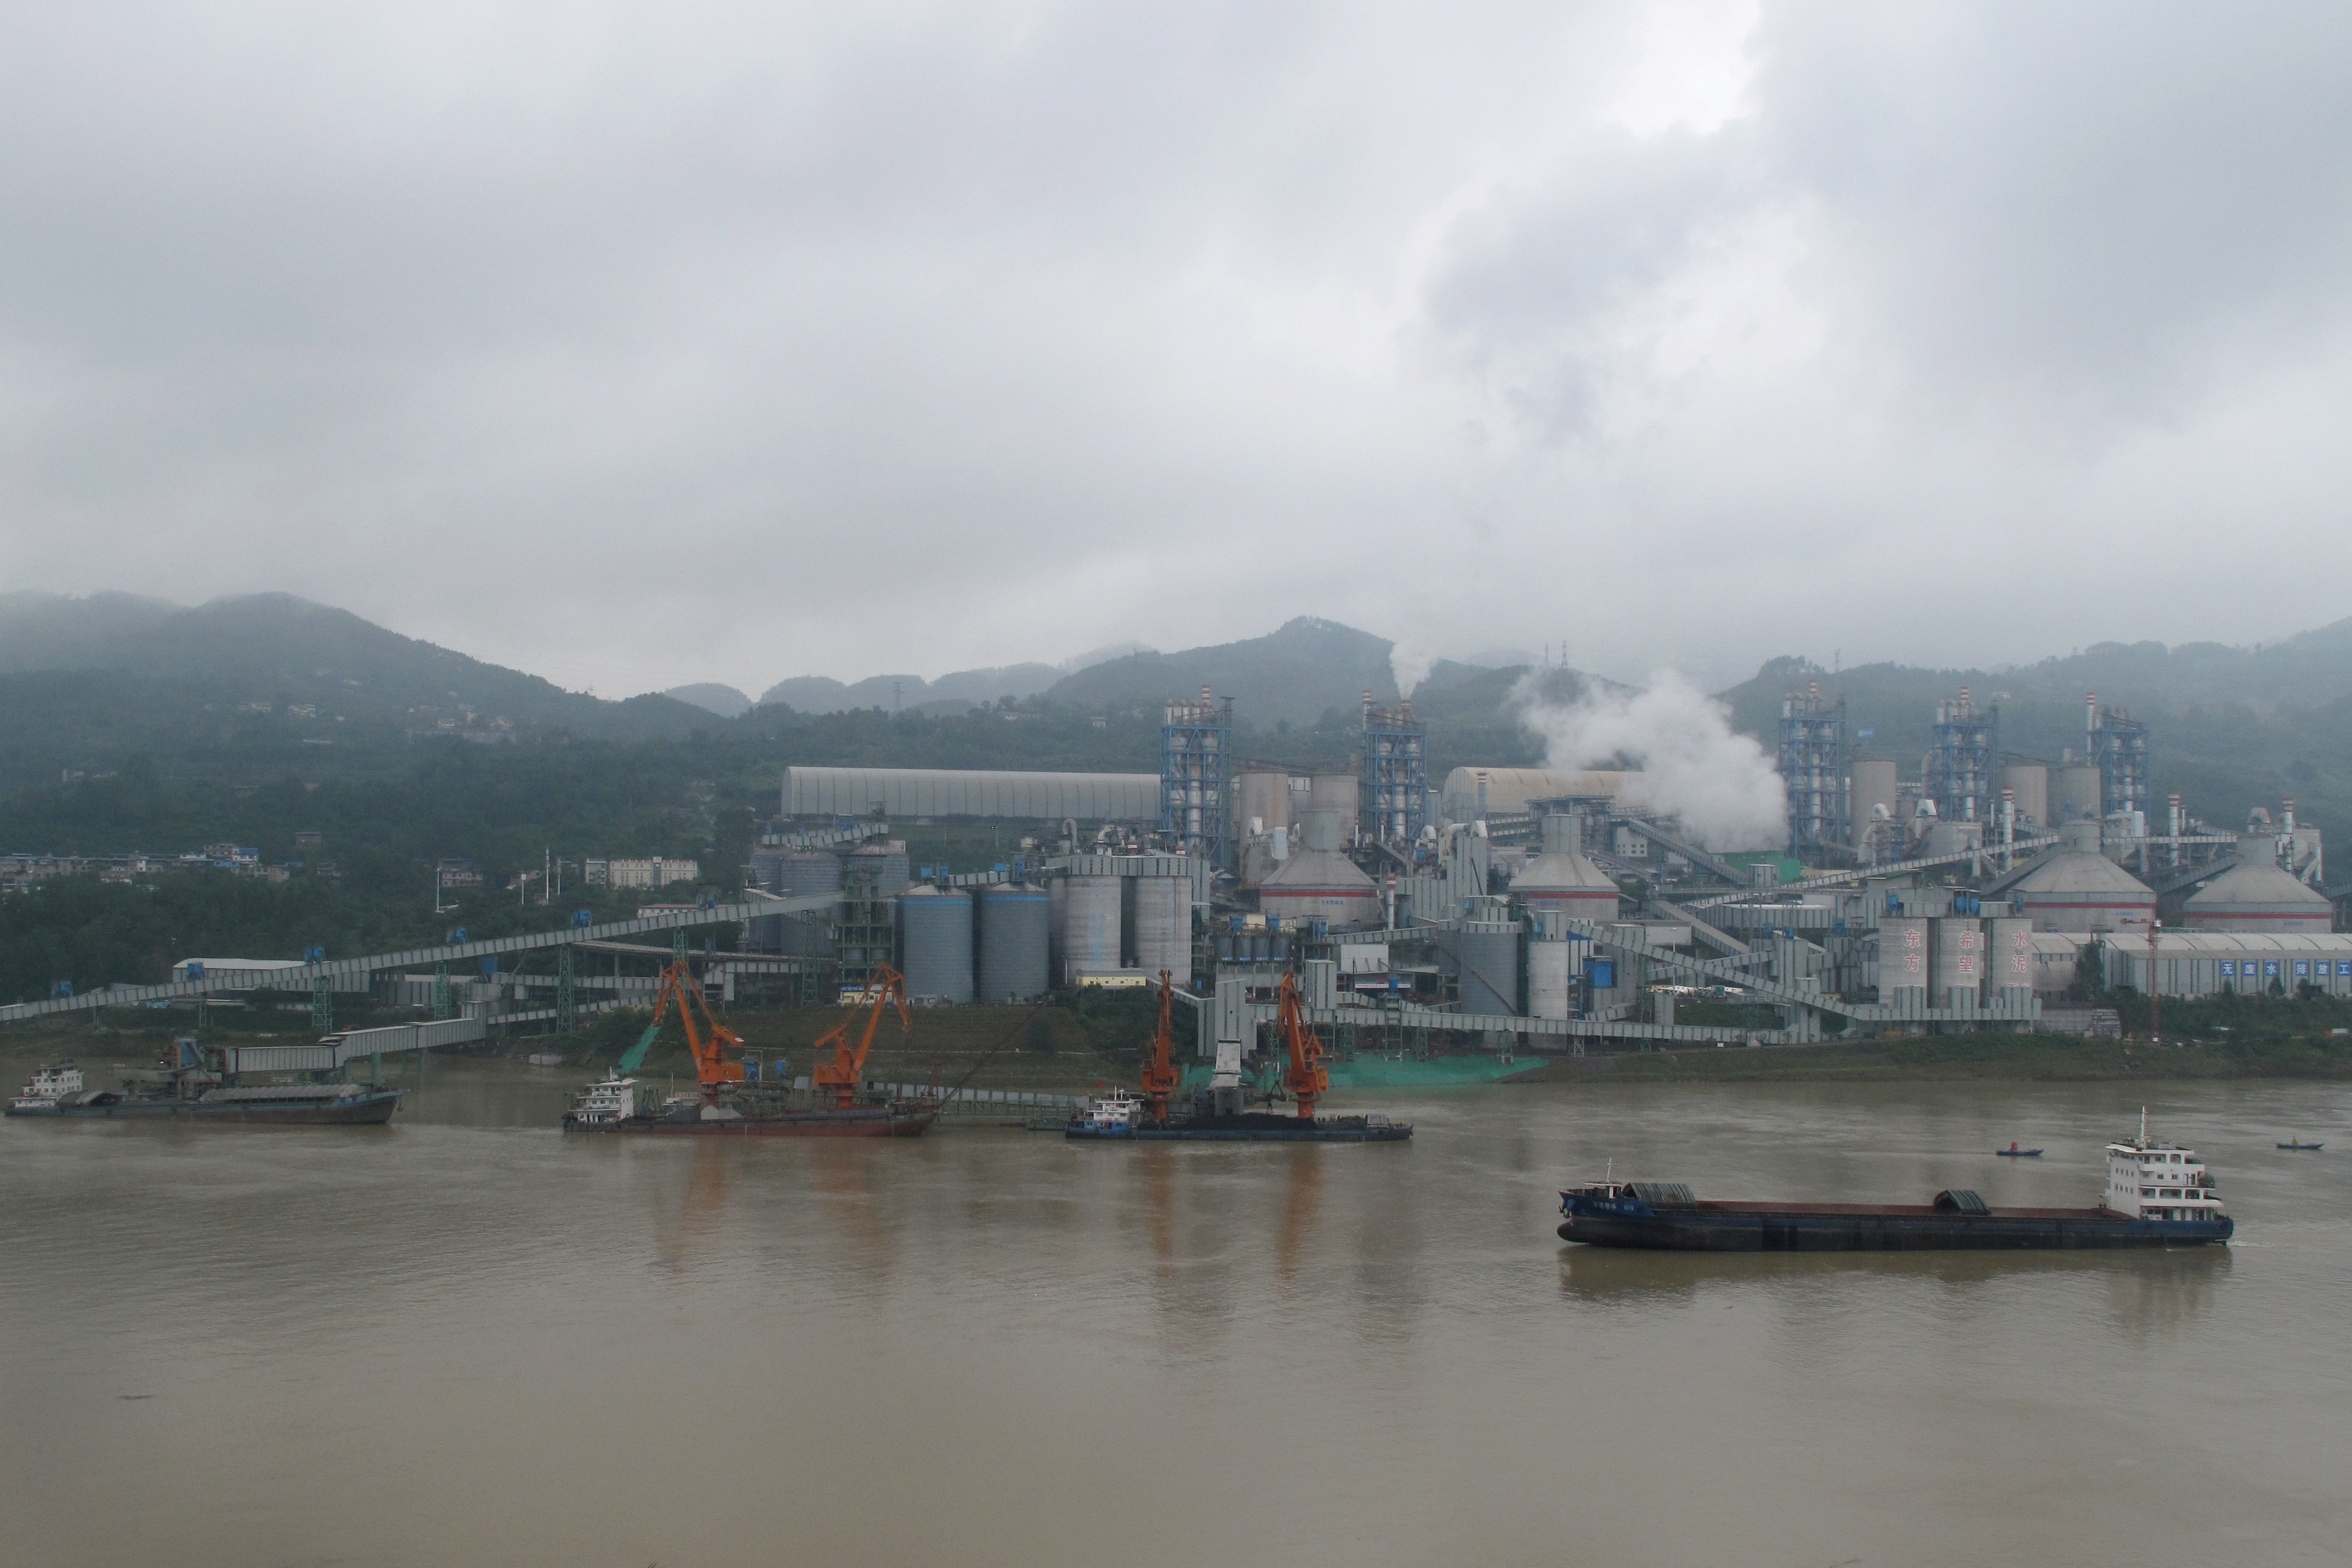 A cement plant in Fuling county in China’s Chongqing. Most of the growth in heavy industries such as steel, cement and chemicals will take place in Asia and other emerging markets in the next few decades, the conference heard. Photo: Reuters